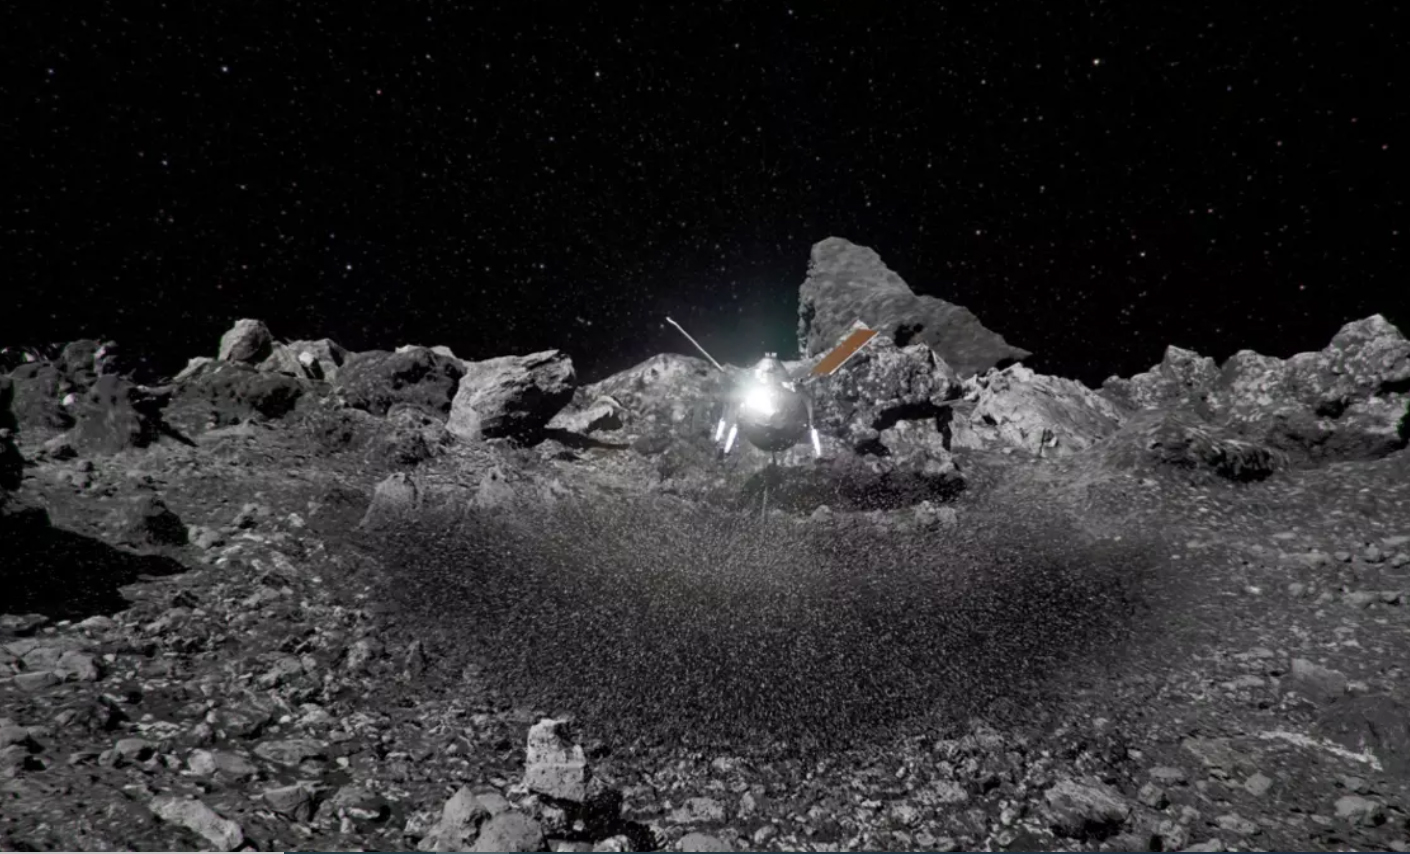 A mass of gravel and debris ejected from the surface of the asteroid Bennu upon touchdown by NASA's OSIRIS-REx probe.